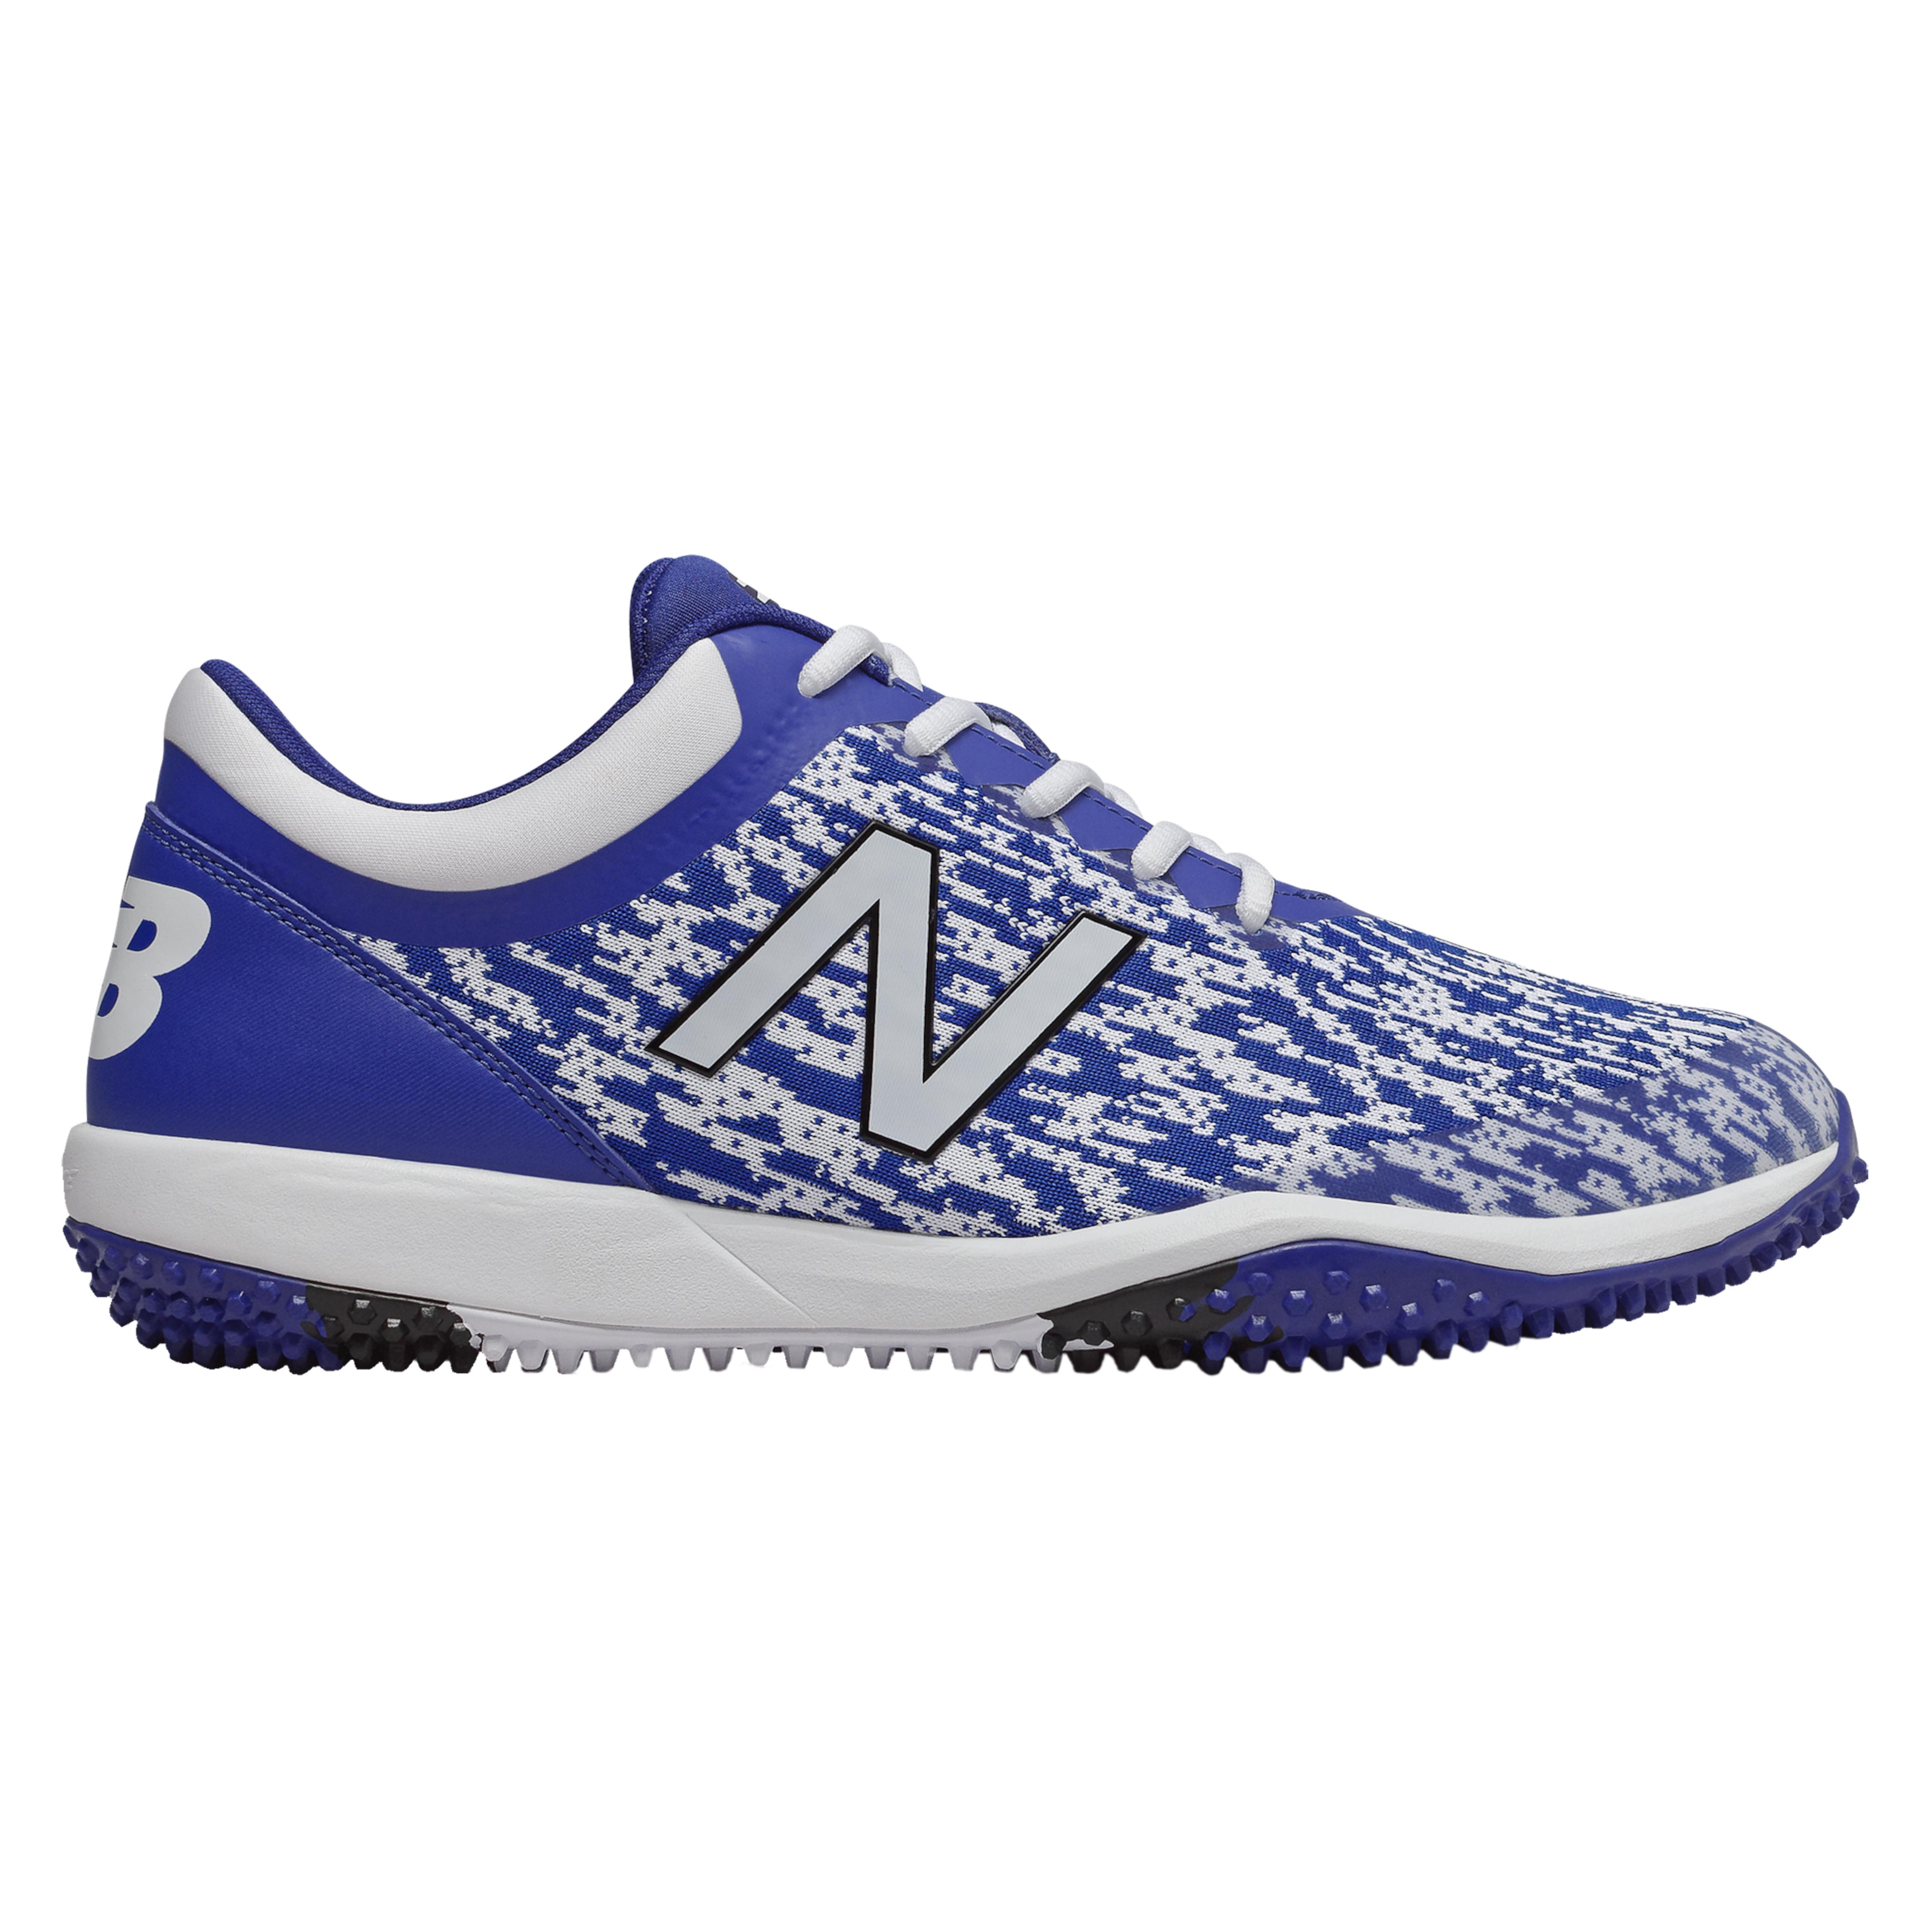 New Balance Synthetic 4040v5 Turf in Blue for Men - Save 18% - Lyst